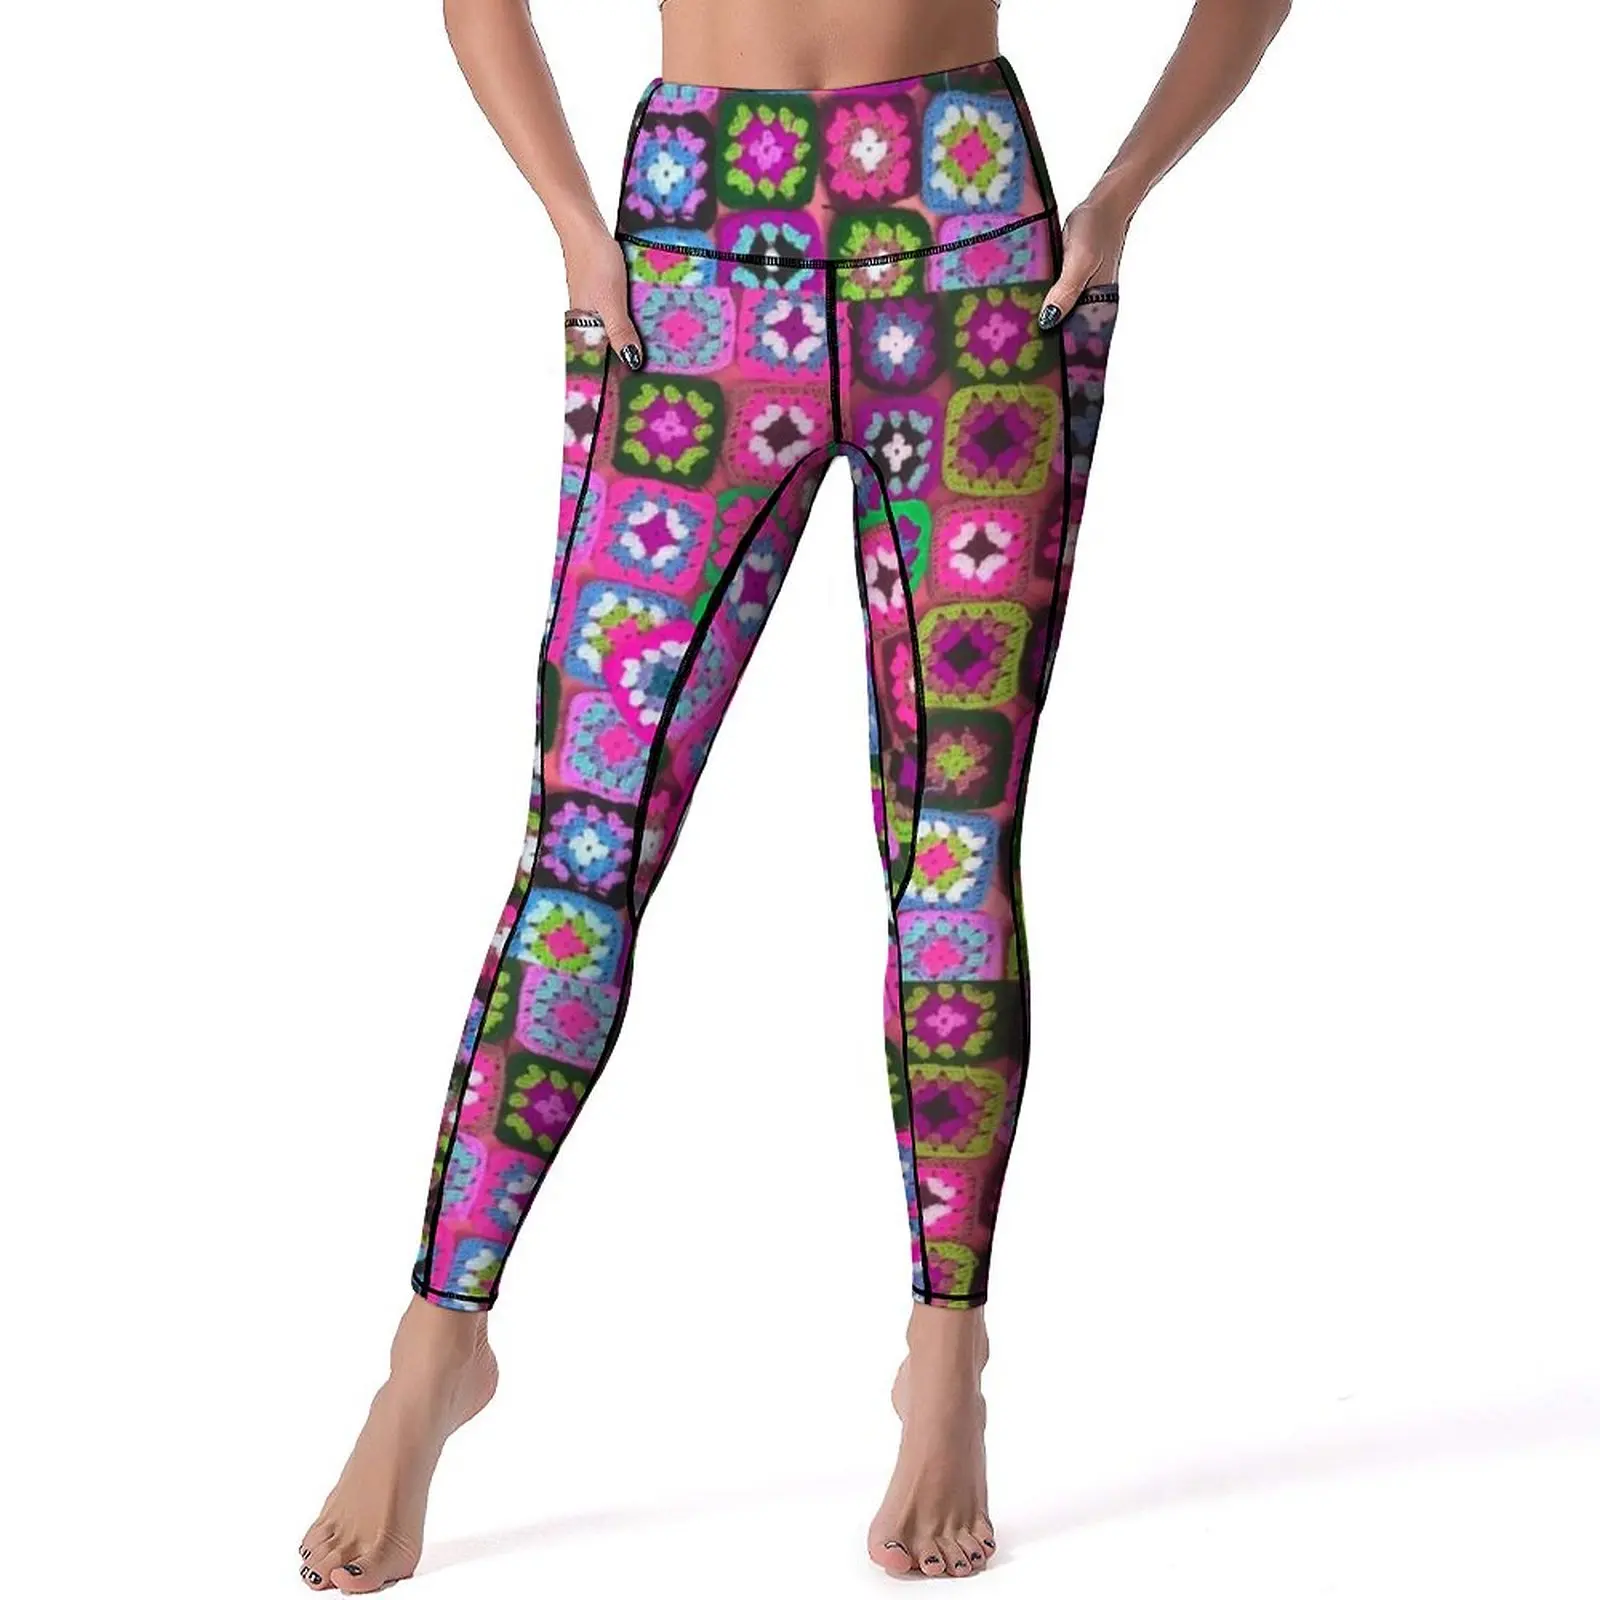 

Hippy Peace Leggings Sexy Square Vintage Print Workout Yoga Pants High Waist Stretchy Sports Tights Breathable Graphic Leggins